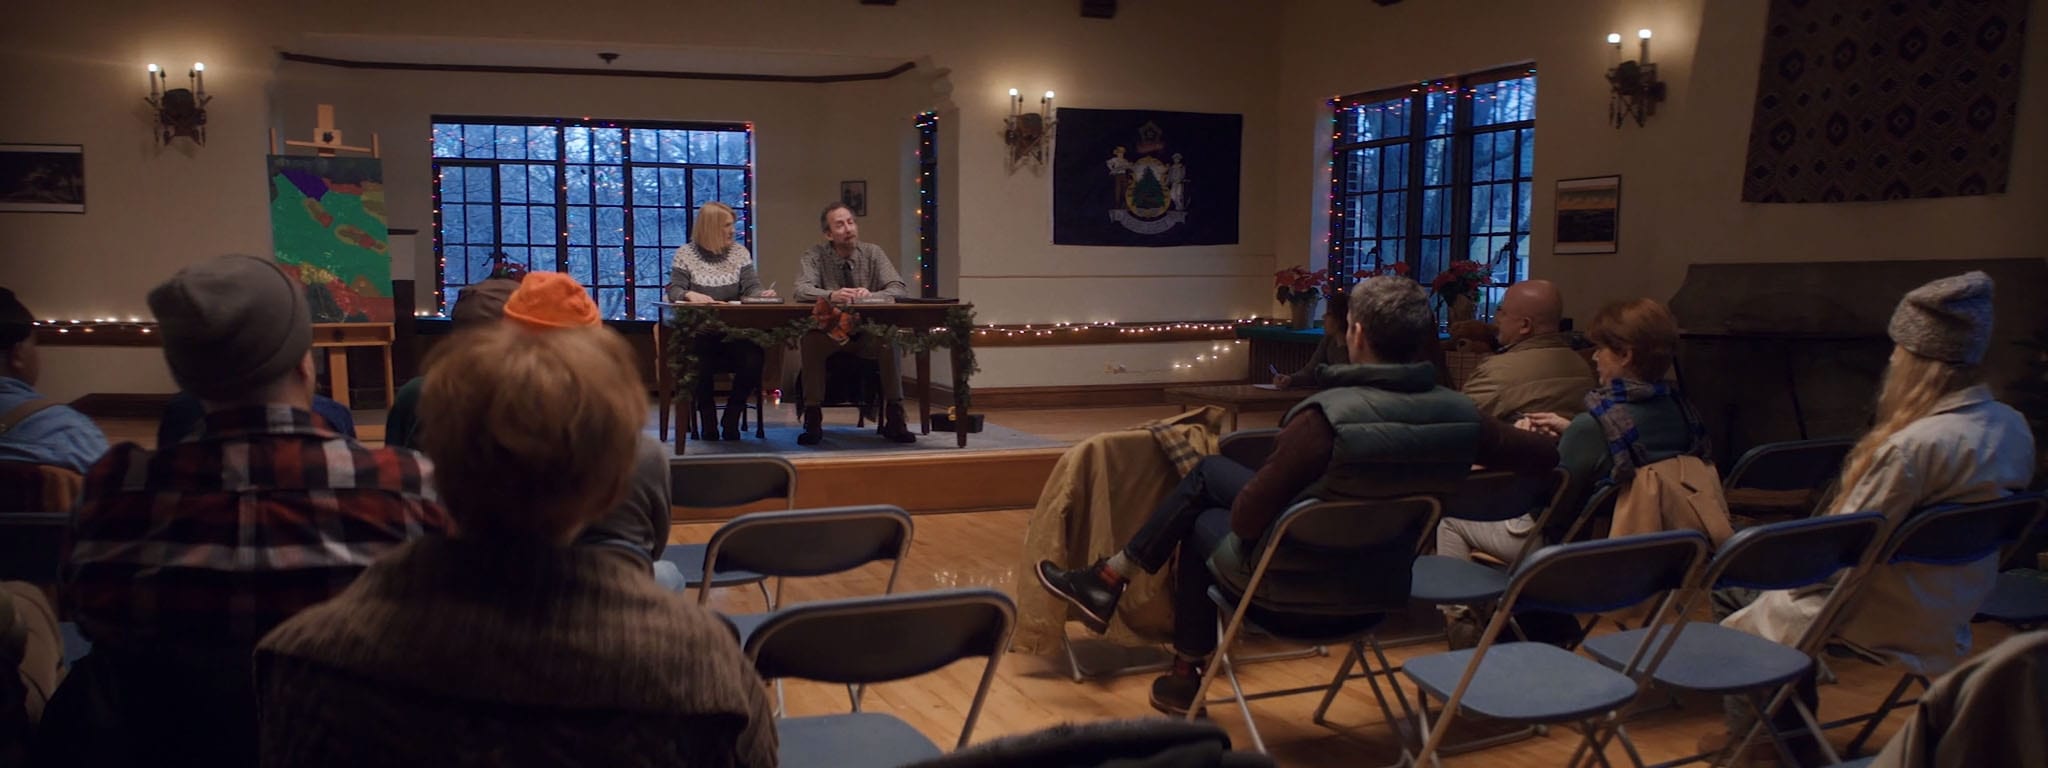 Town Hall - Short Film Review - Indie Shorts Mag